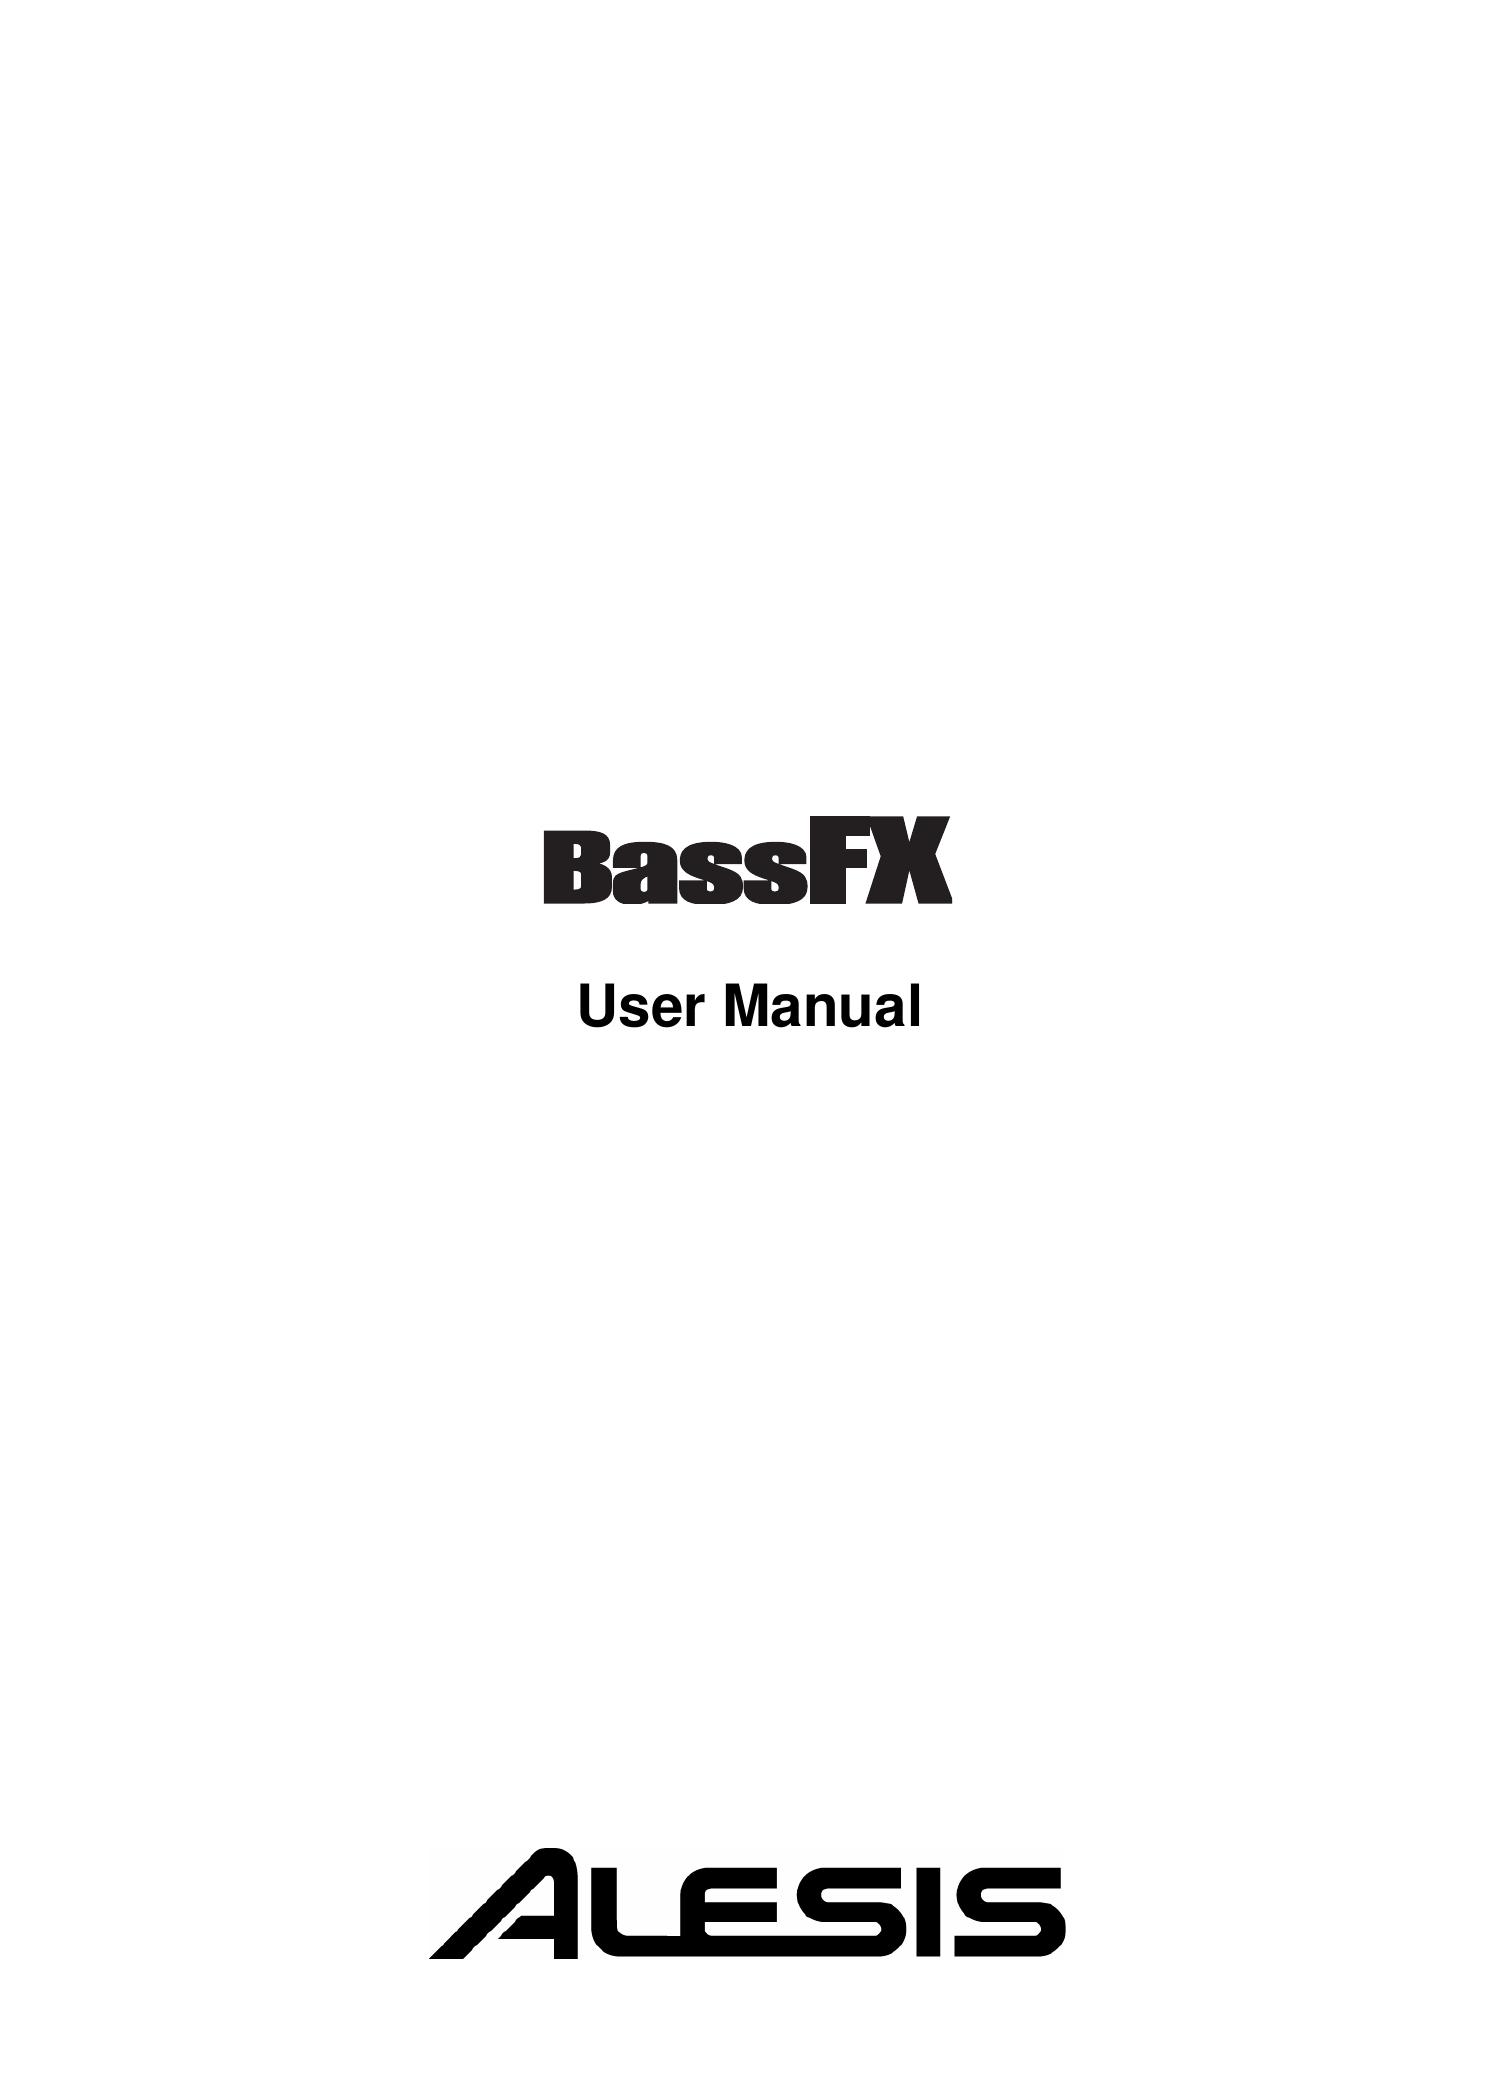 Alesis BassFX Musical Instrument User Manual (Page 1)